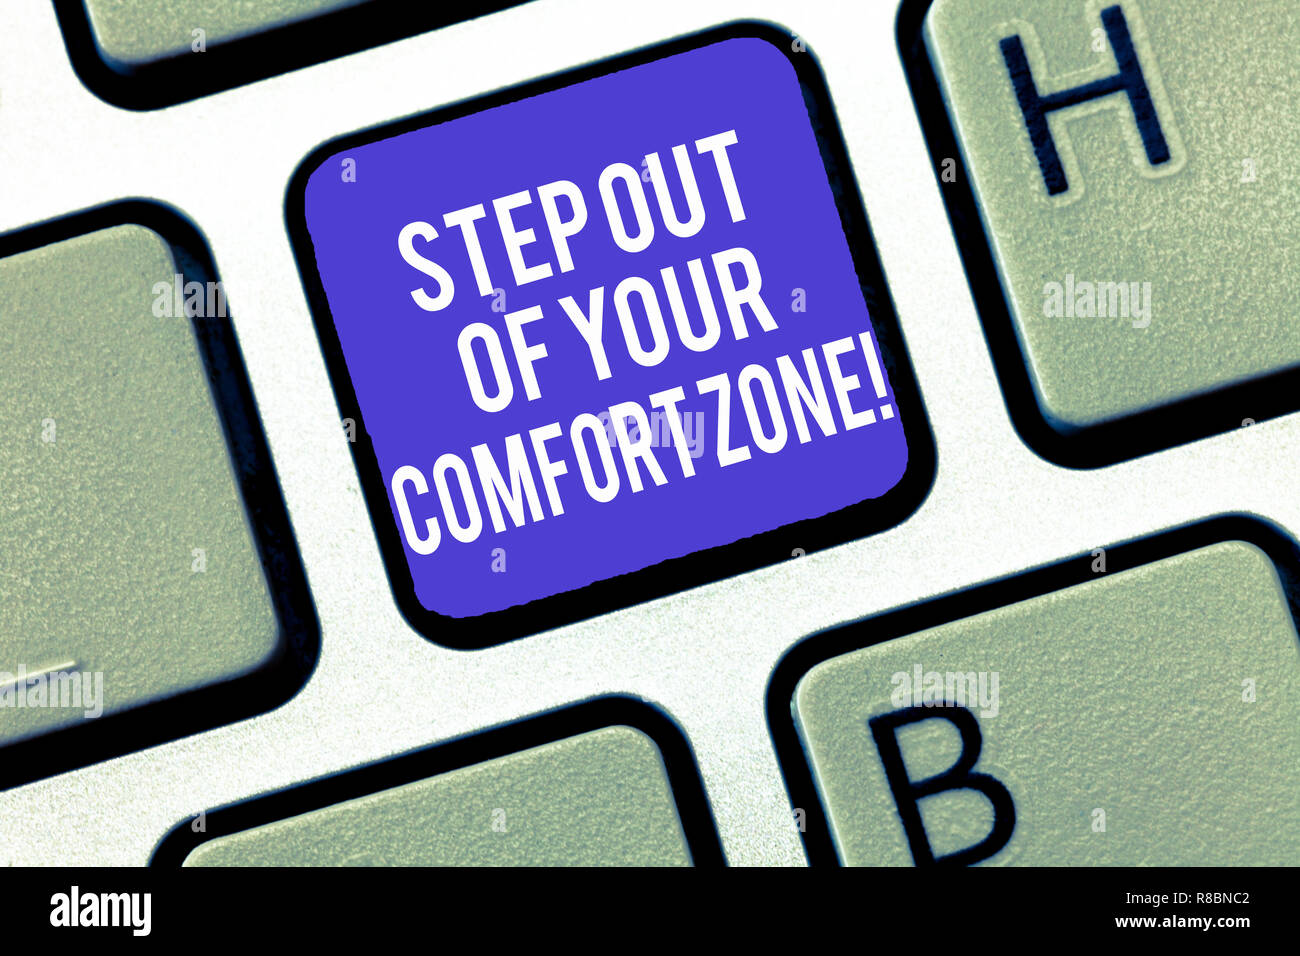 ExecuNet The Keys to Stepping Outside Your Comfort Zone